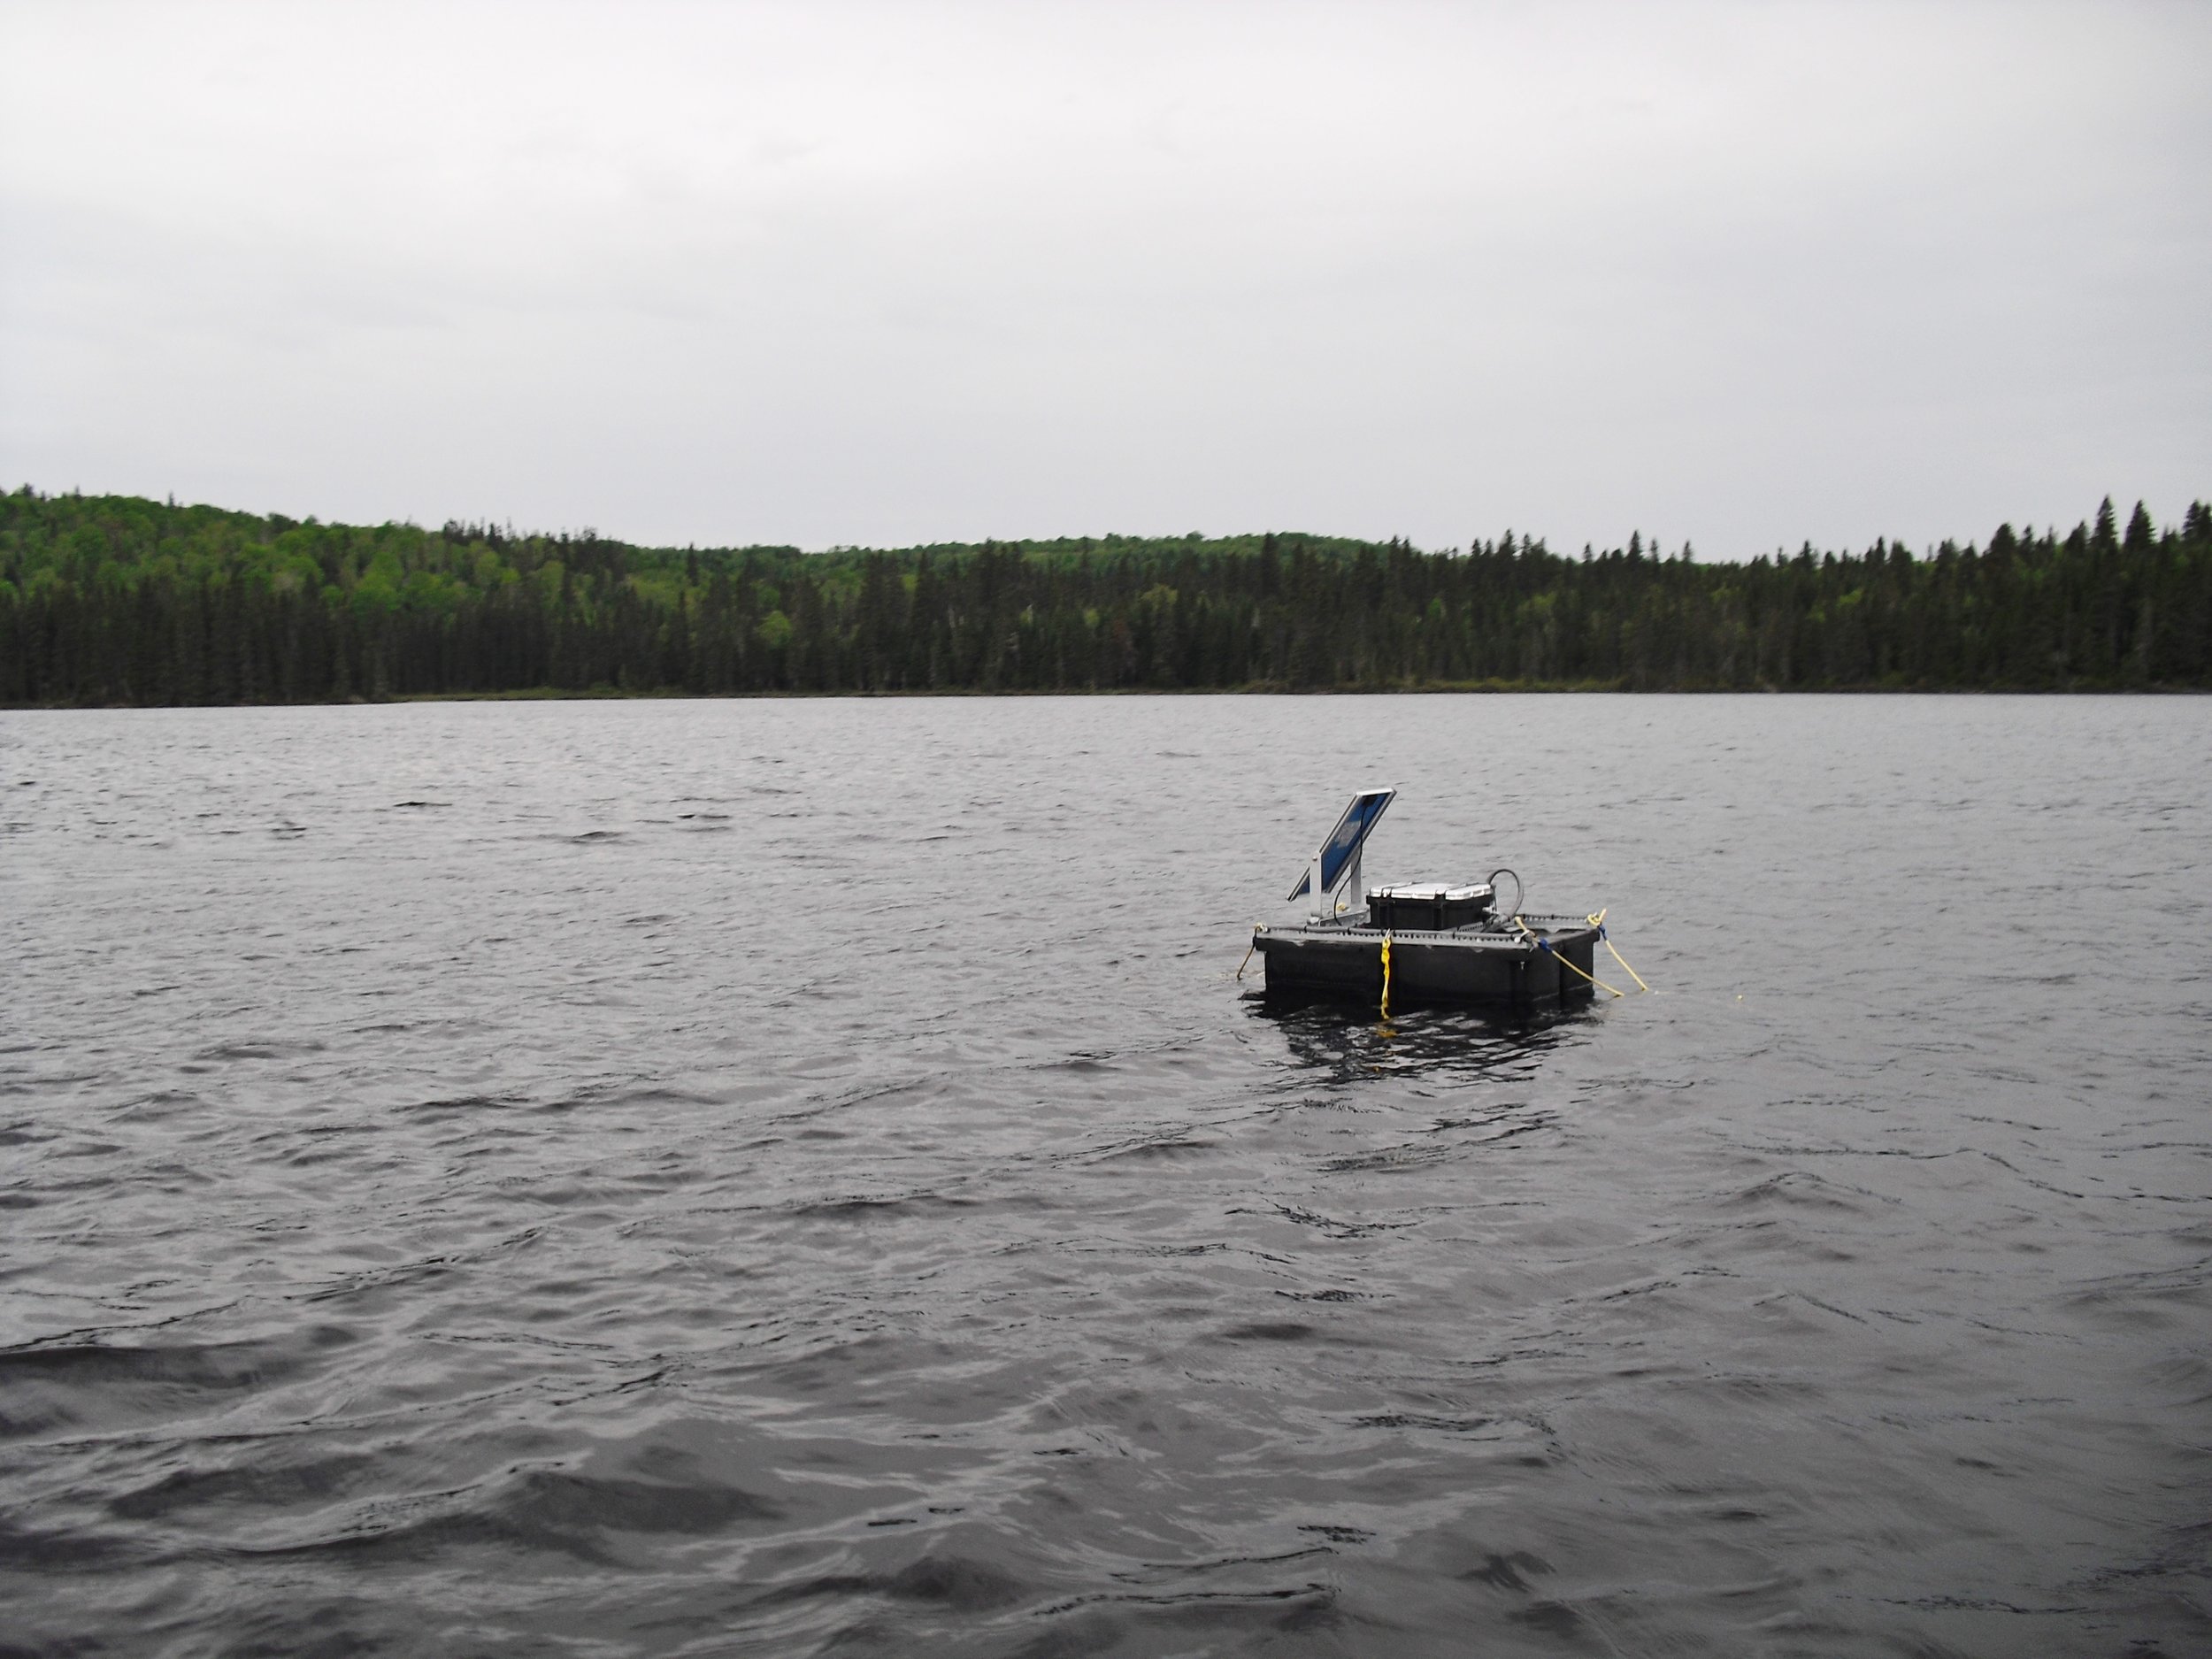 Monitoring_Lake_Simoncouche_by_Dominic_Vachon_on_2011_05_07.JPG